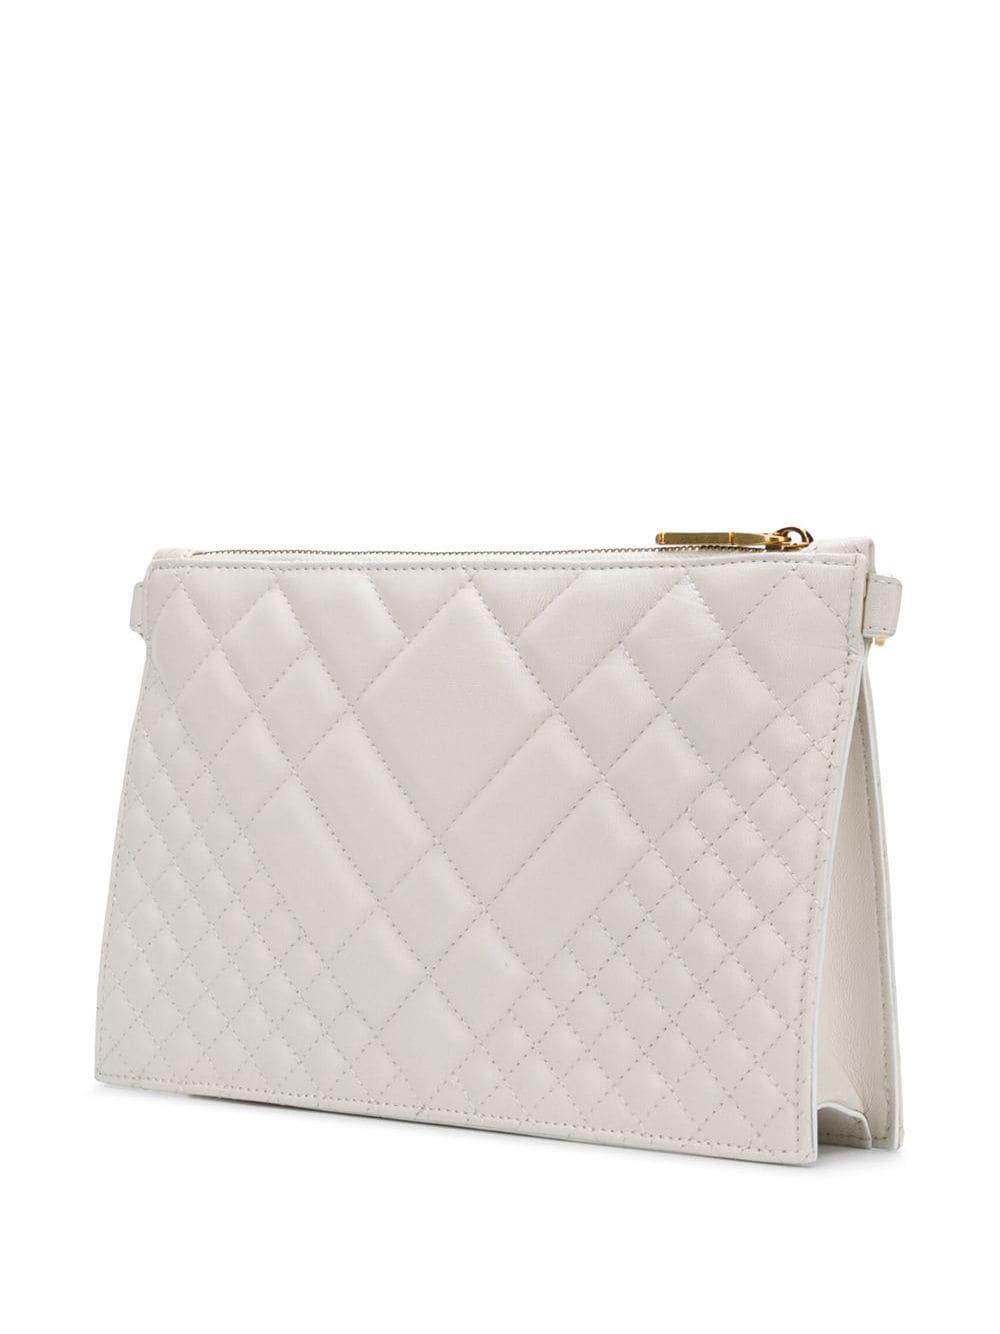 Versace Leather Quilted Medusa Clutch Bag in White - Lyst